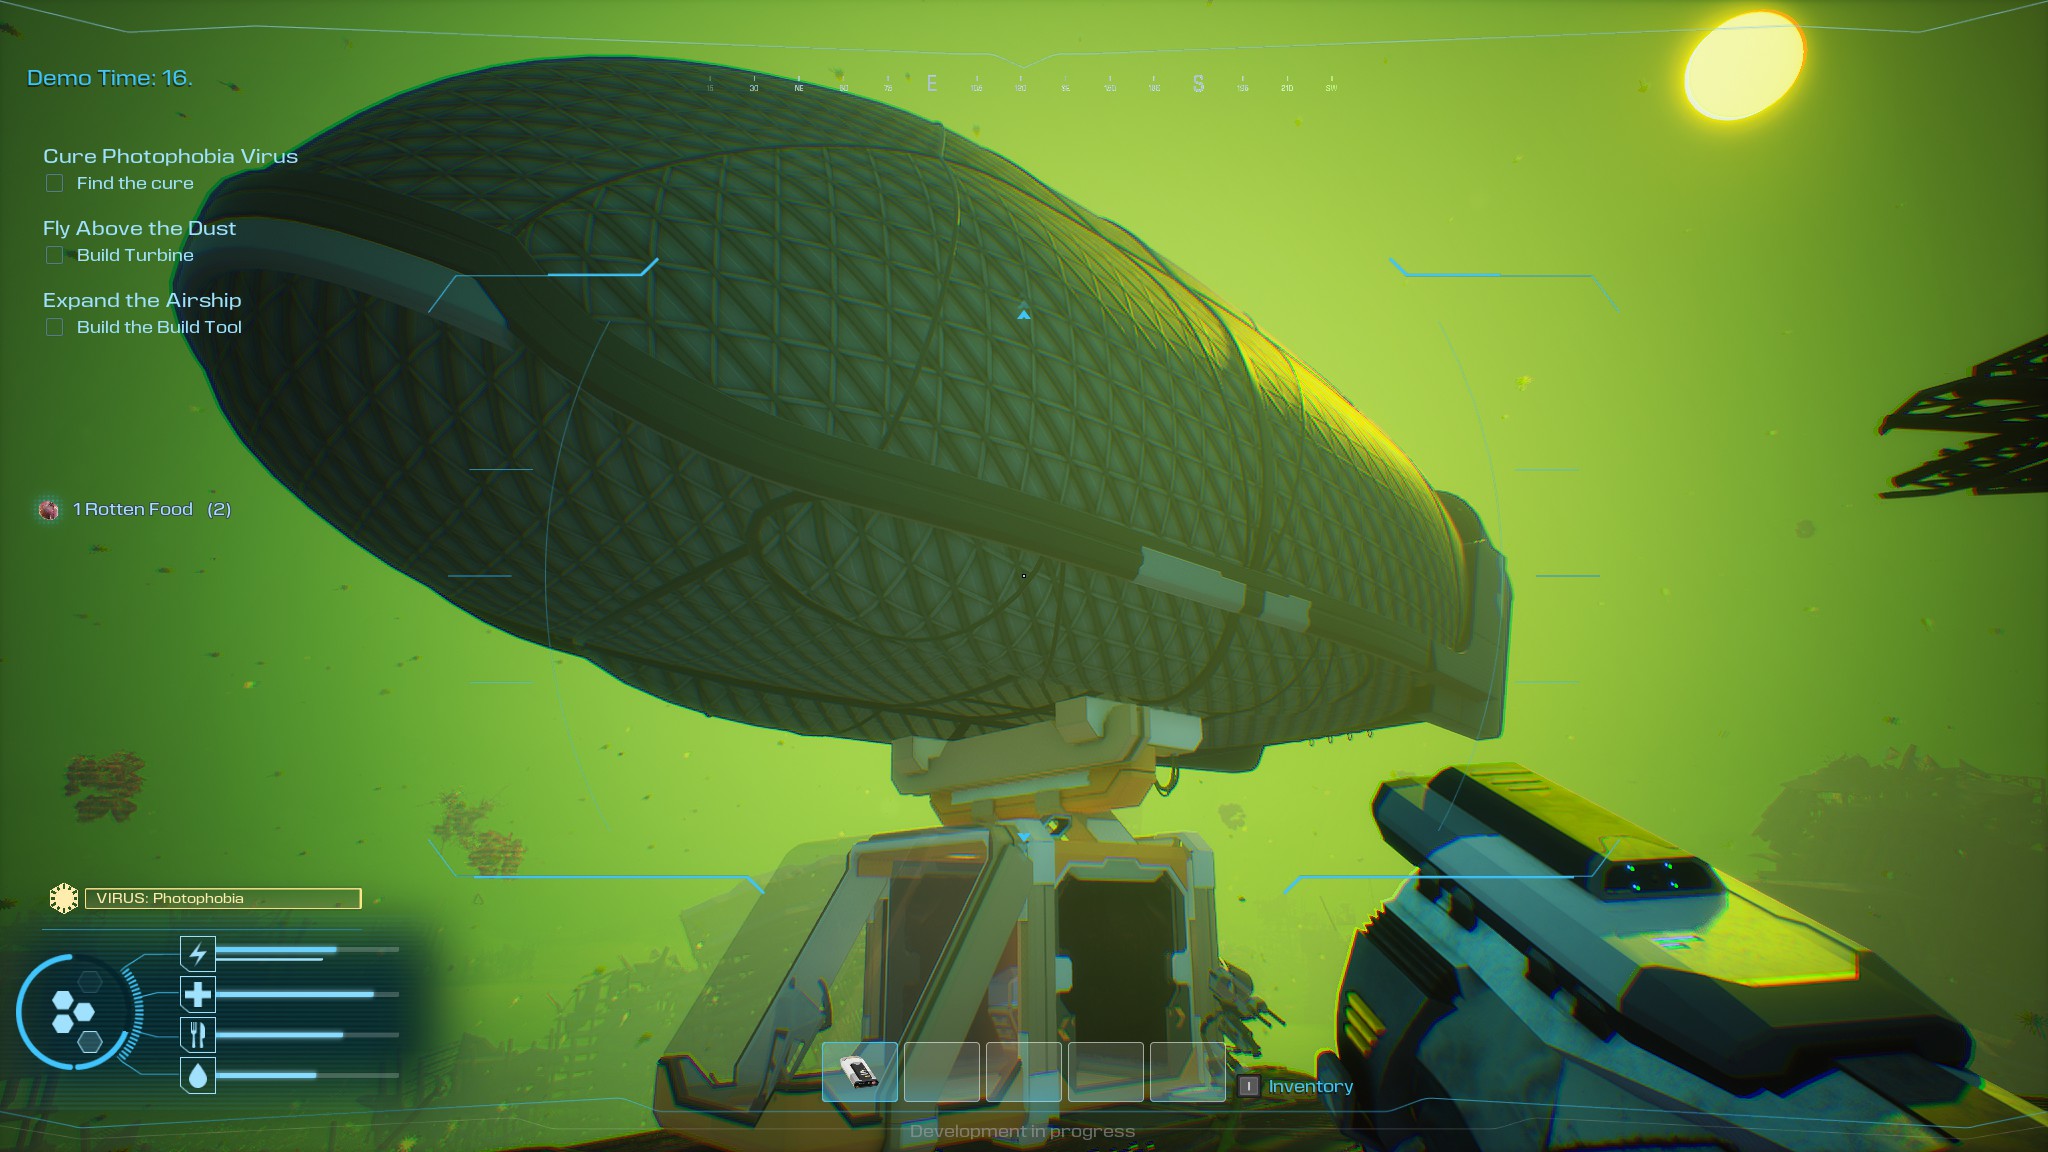 Here’s a survival game first: I just went fishing for giant moths off the edge of my blimp